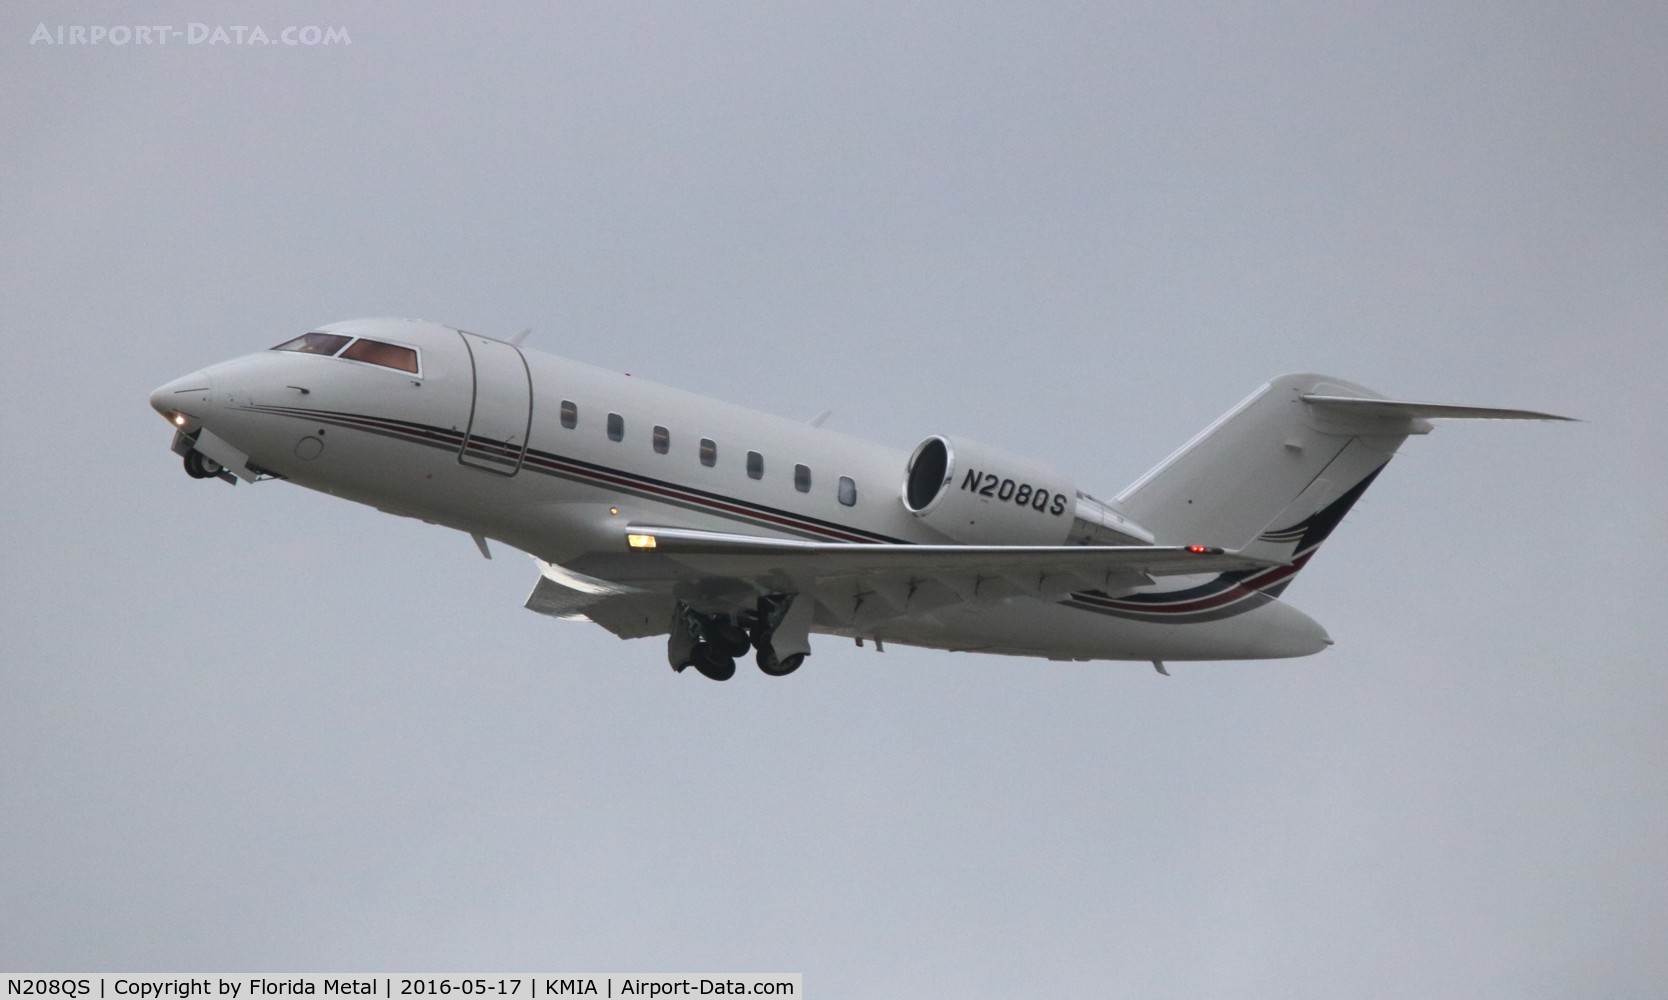 N208QS, 2015 Bombardier Challenger 650 (CL-600-2B16) C/N 6056, Challenger 650 zx